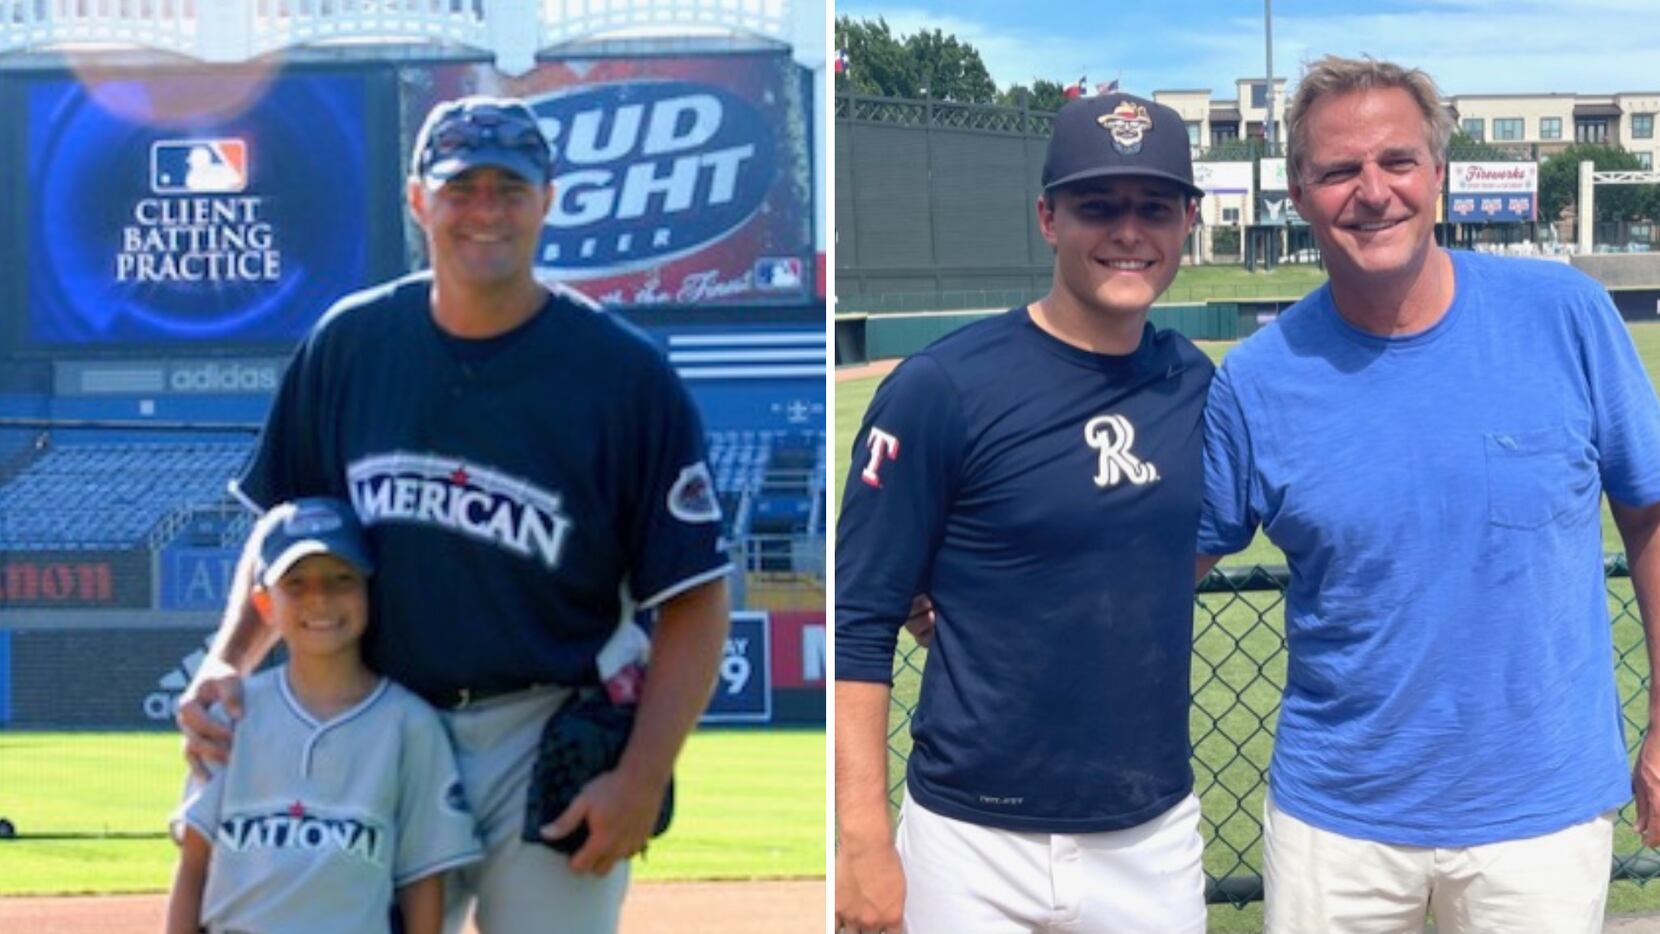 Texas Rangers pitching prospect Jack Leiter with his father, Al, throughout the years.